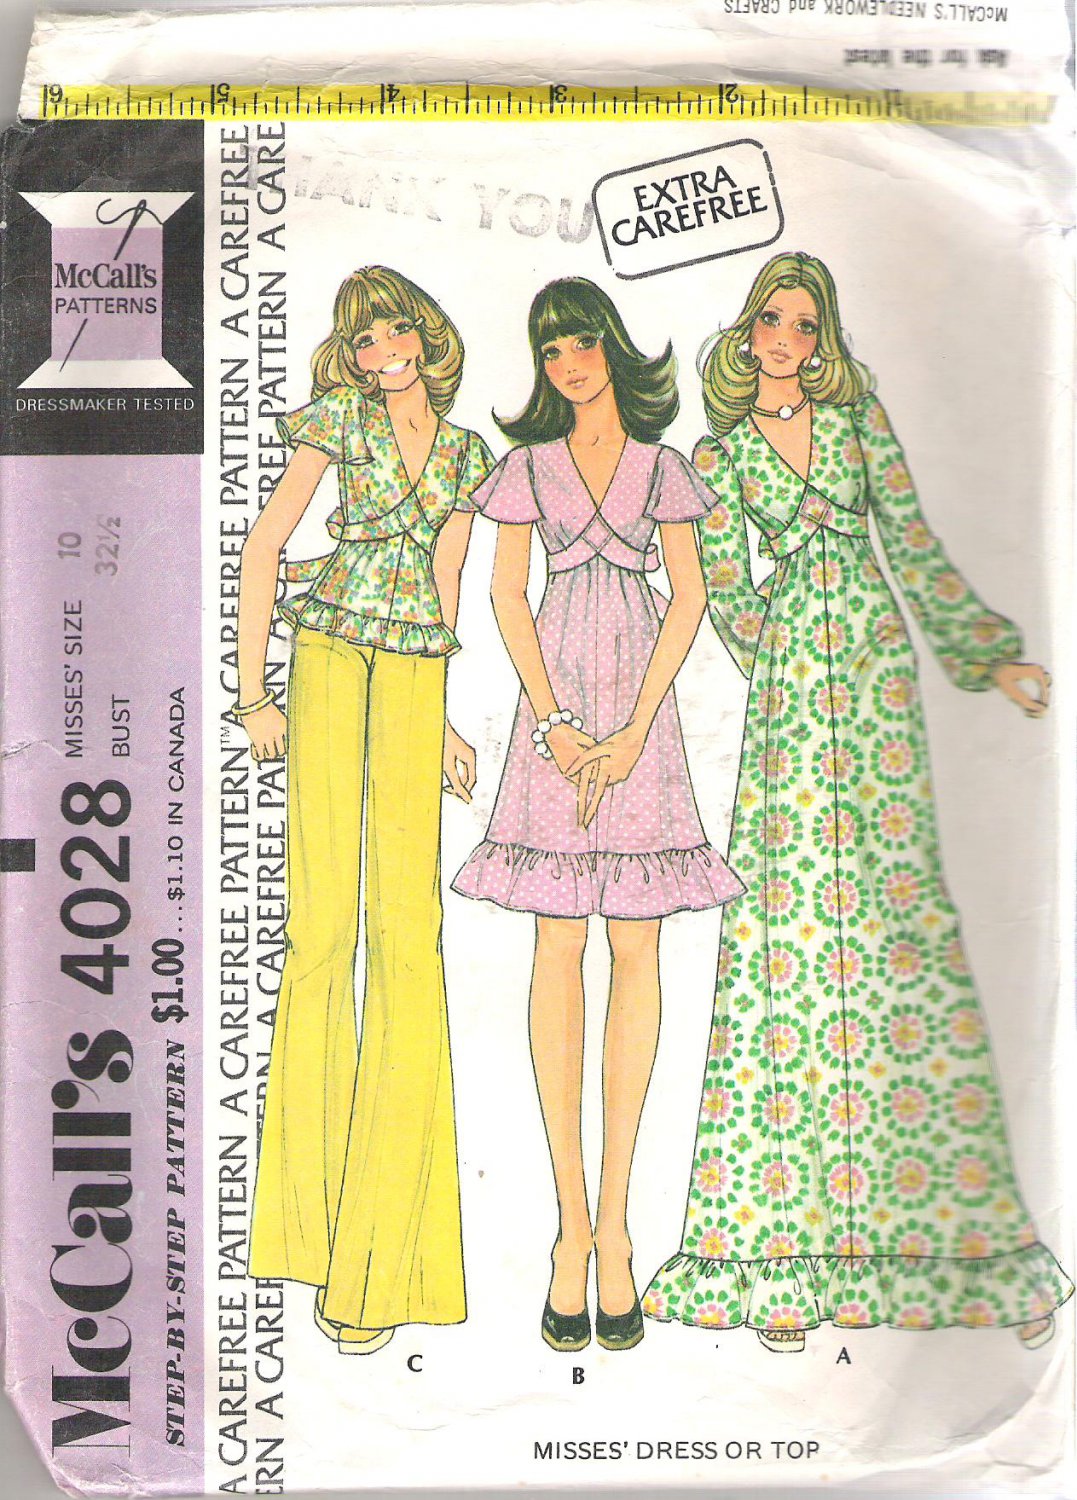 McCalls 4028 (1974) Vintage Pattern Pull-over Dress & Top  Size 10  Cut